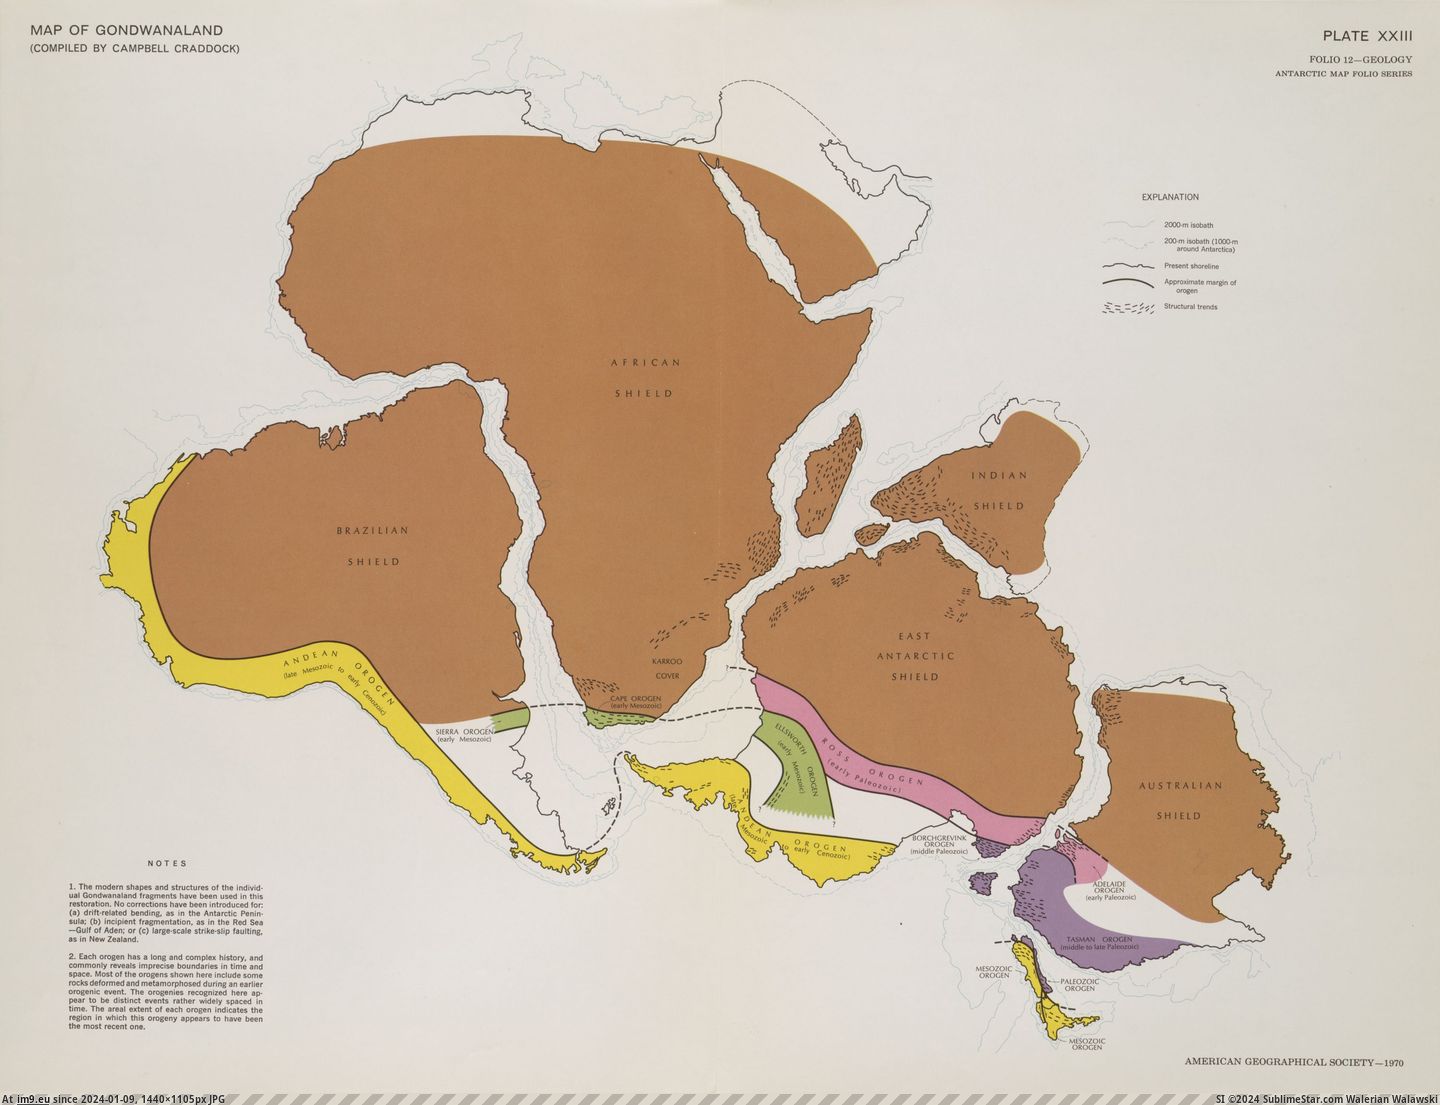 #Map #American #Campbell #Society #Compiled [Mapporn] Map of Gondwanaland (compiled by Campbell Craddock). American Geographical Society, 1970. [3000x2278] Pic. (Bild von album My r/MAPS favs))